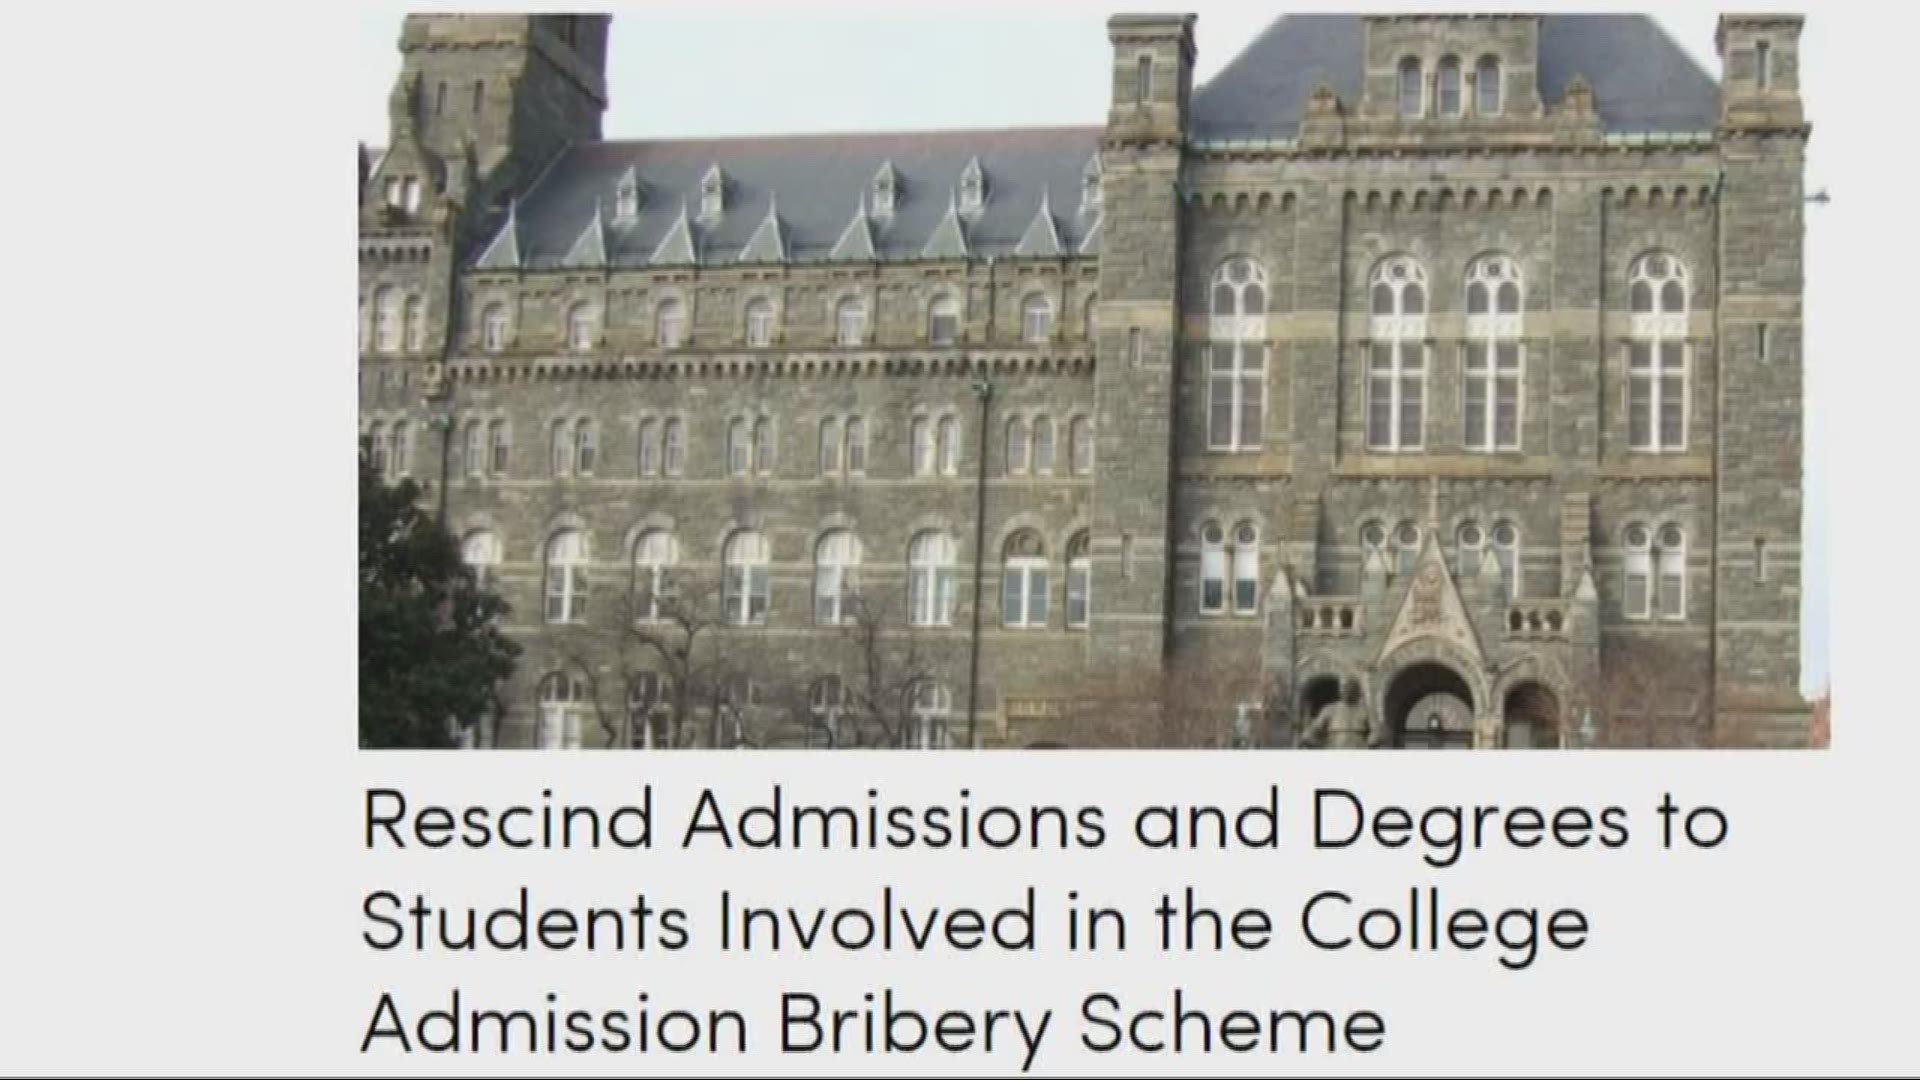 Do you think students at Georgetown University who were caught in the college admission scandal should lose their degrees?